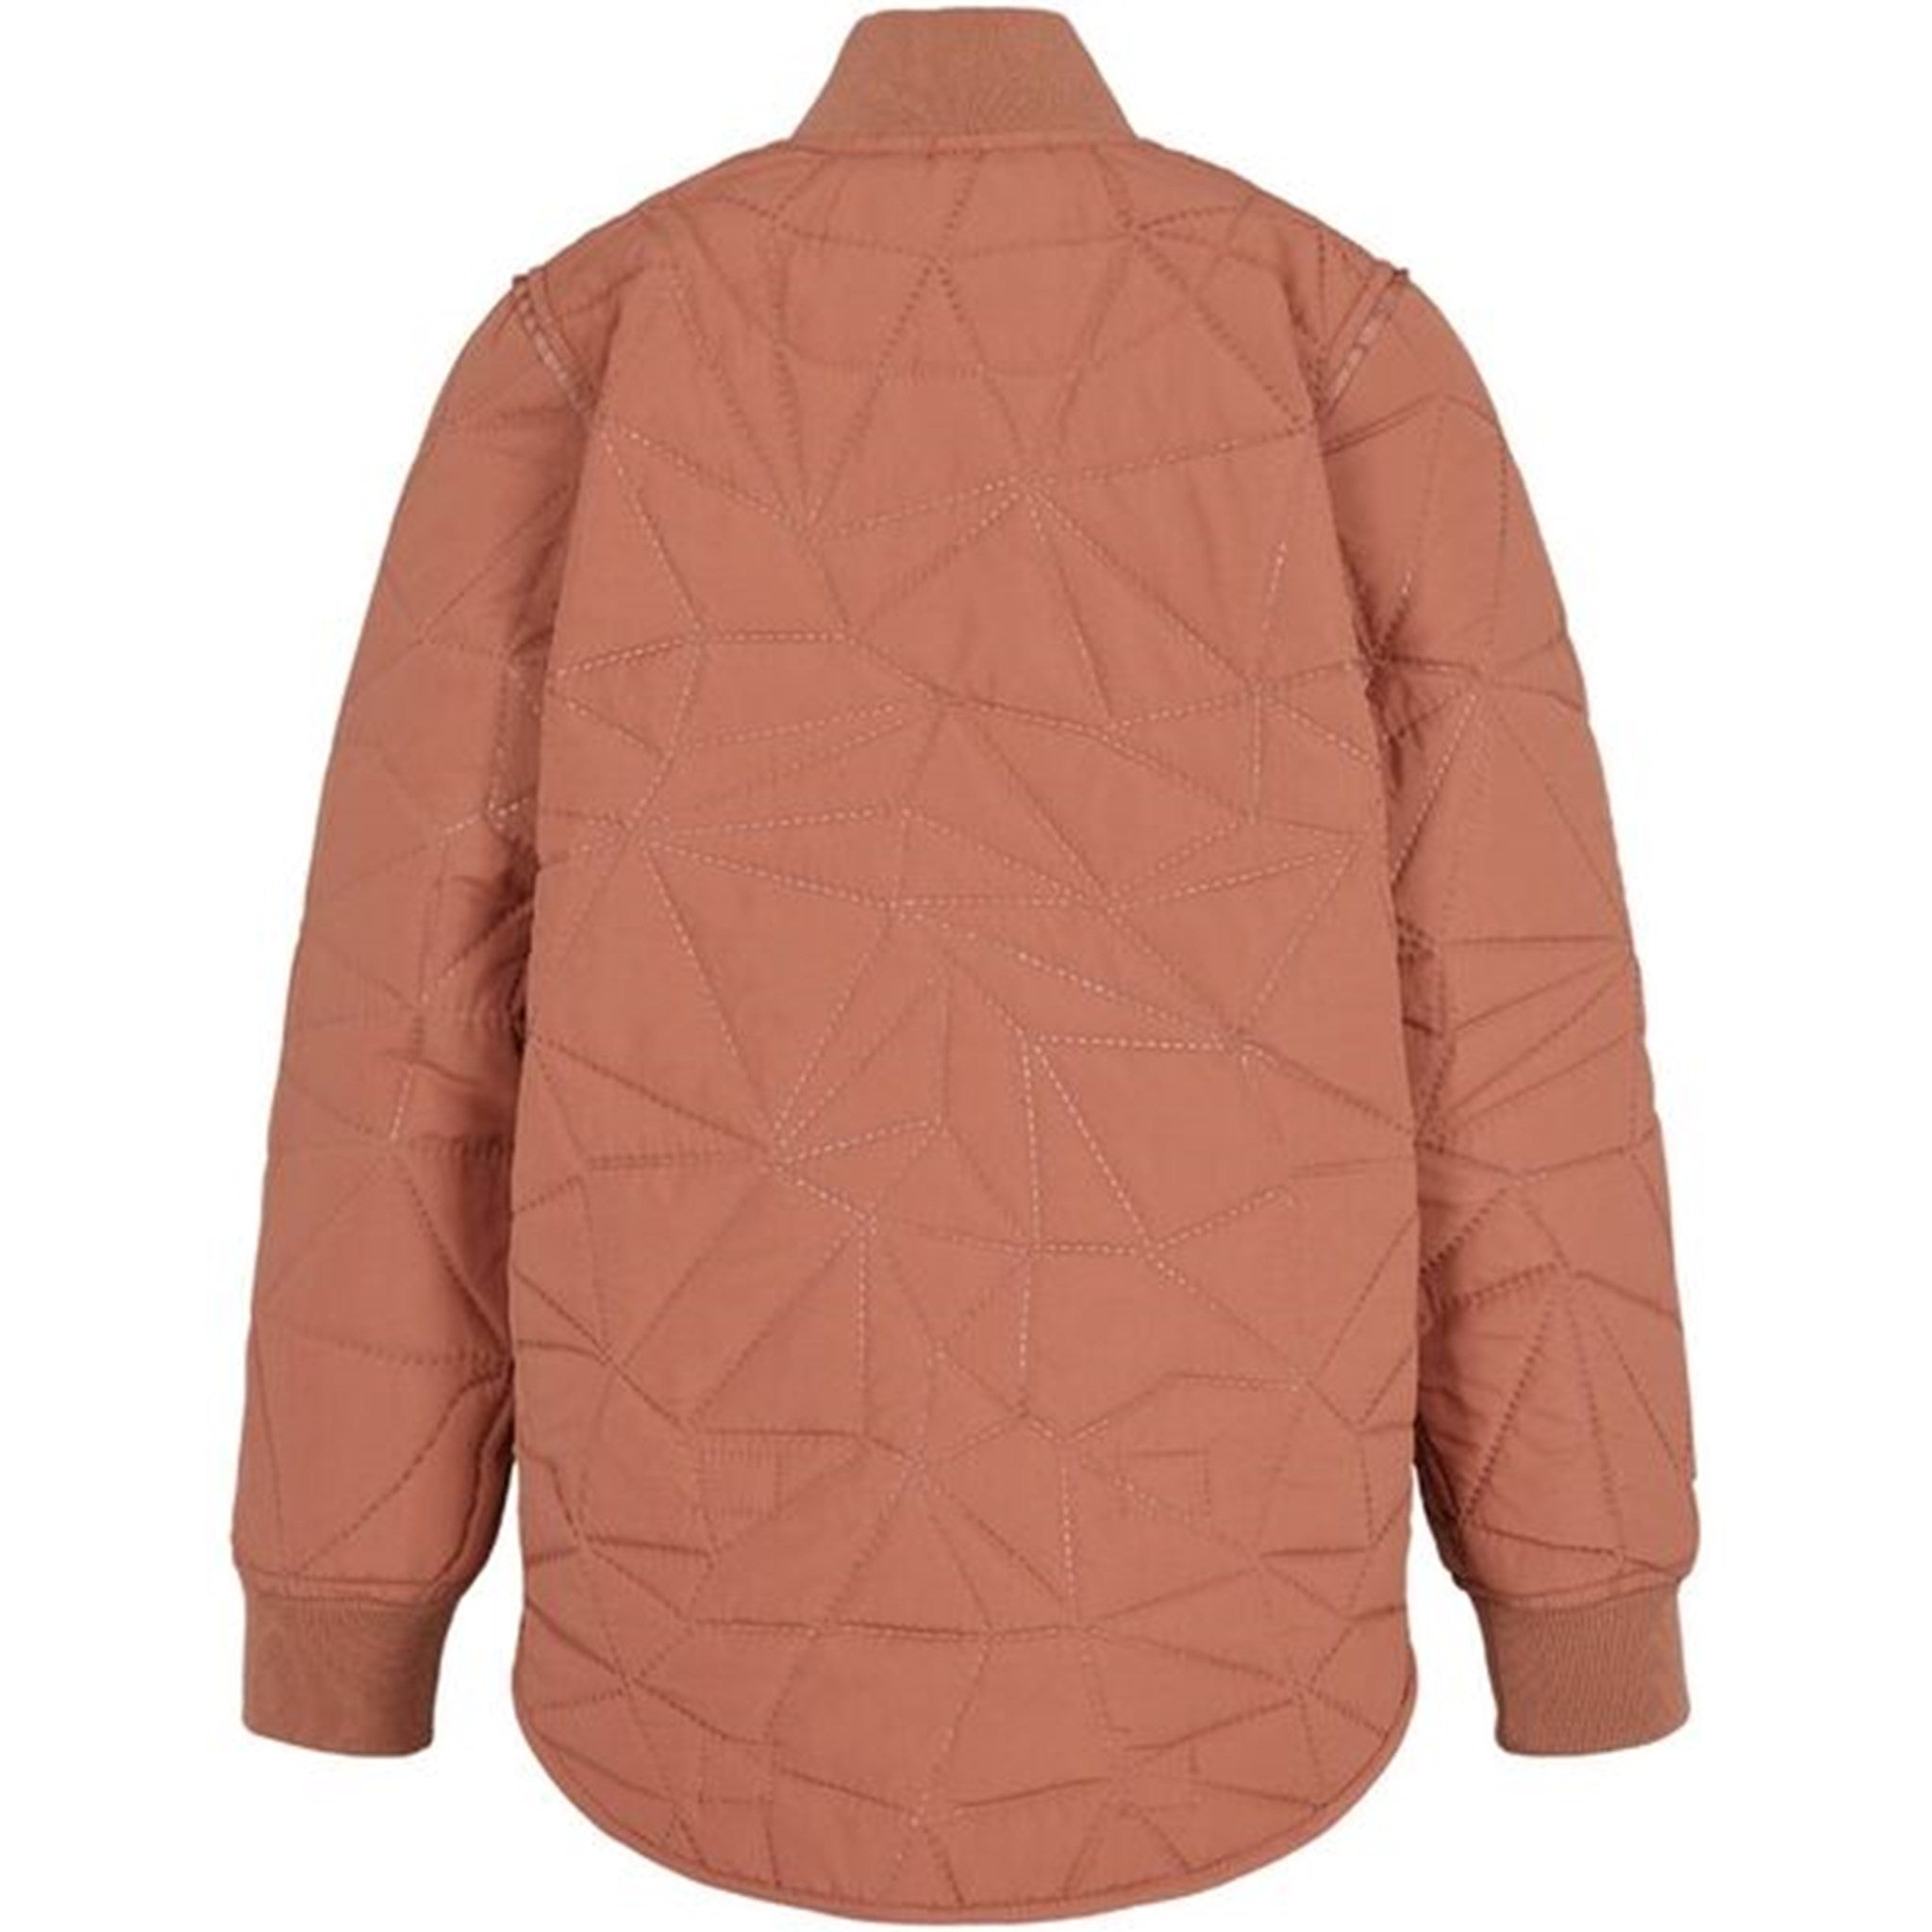 MarMar Rose Blush Jacket Thermo Orry 3